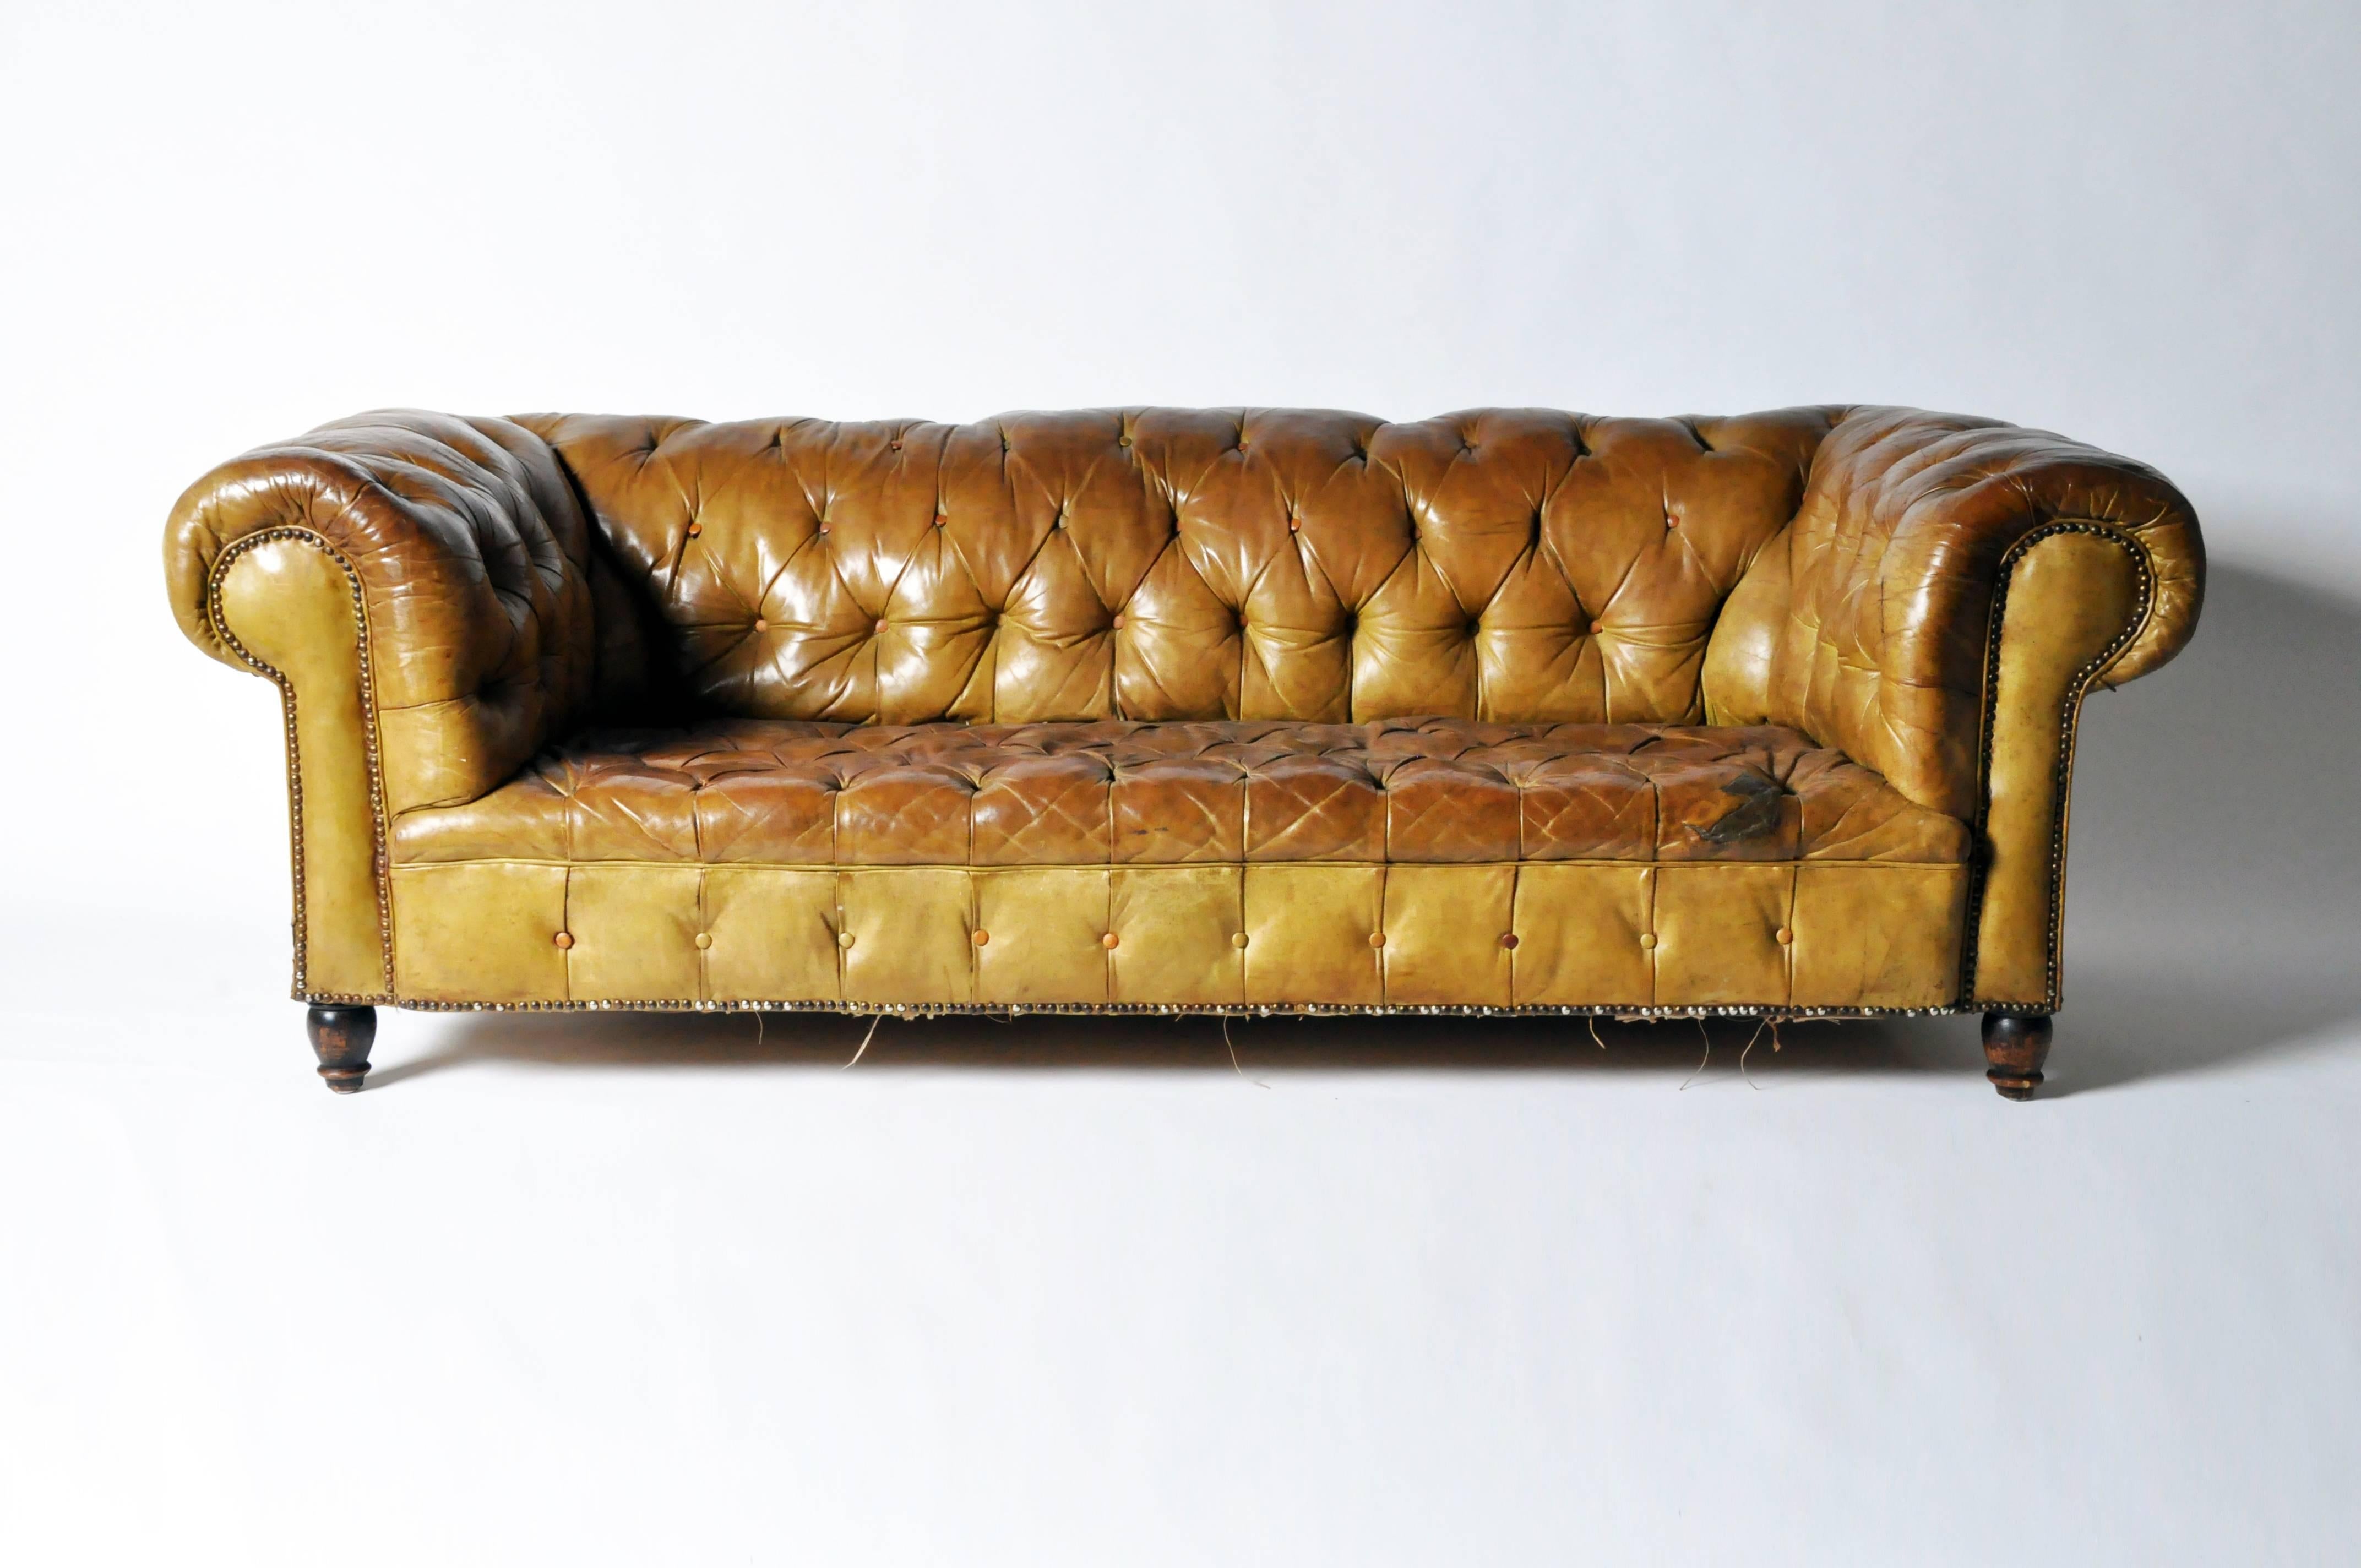 This classic couch is the definition of old fashioned luxury. True to form and style, a myriad of button tufts create a quilted texture that covers the back, seat and rolled arms. The unique design and choice of leather upholstery is linked back to